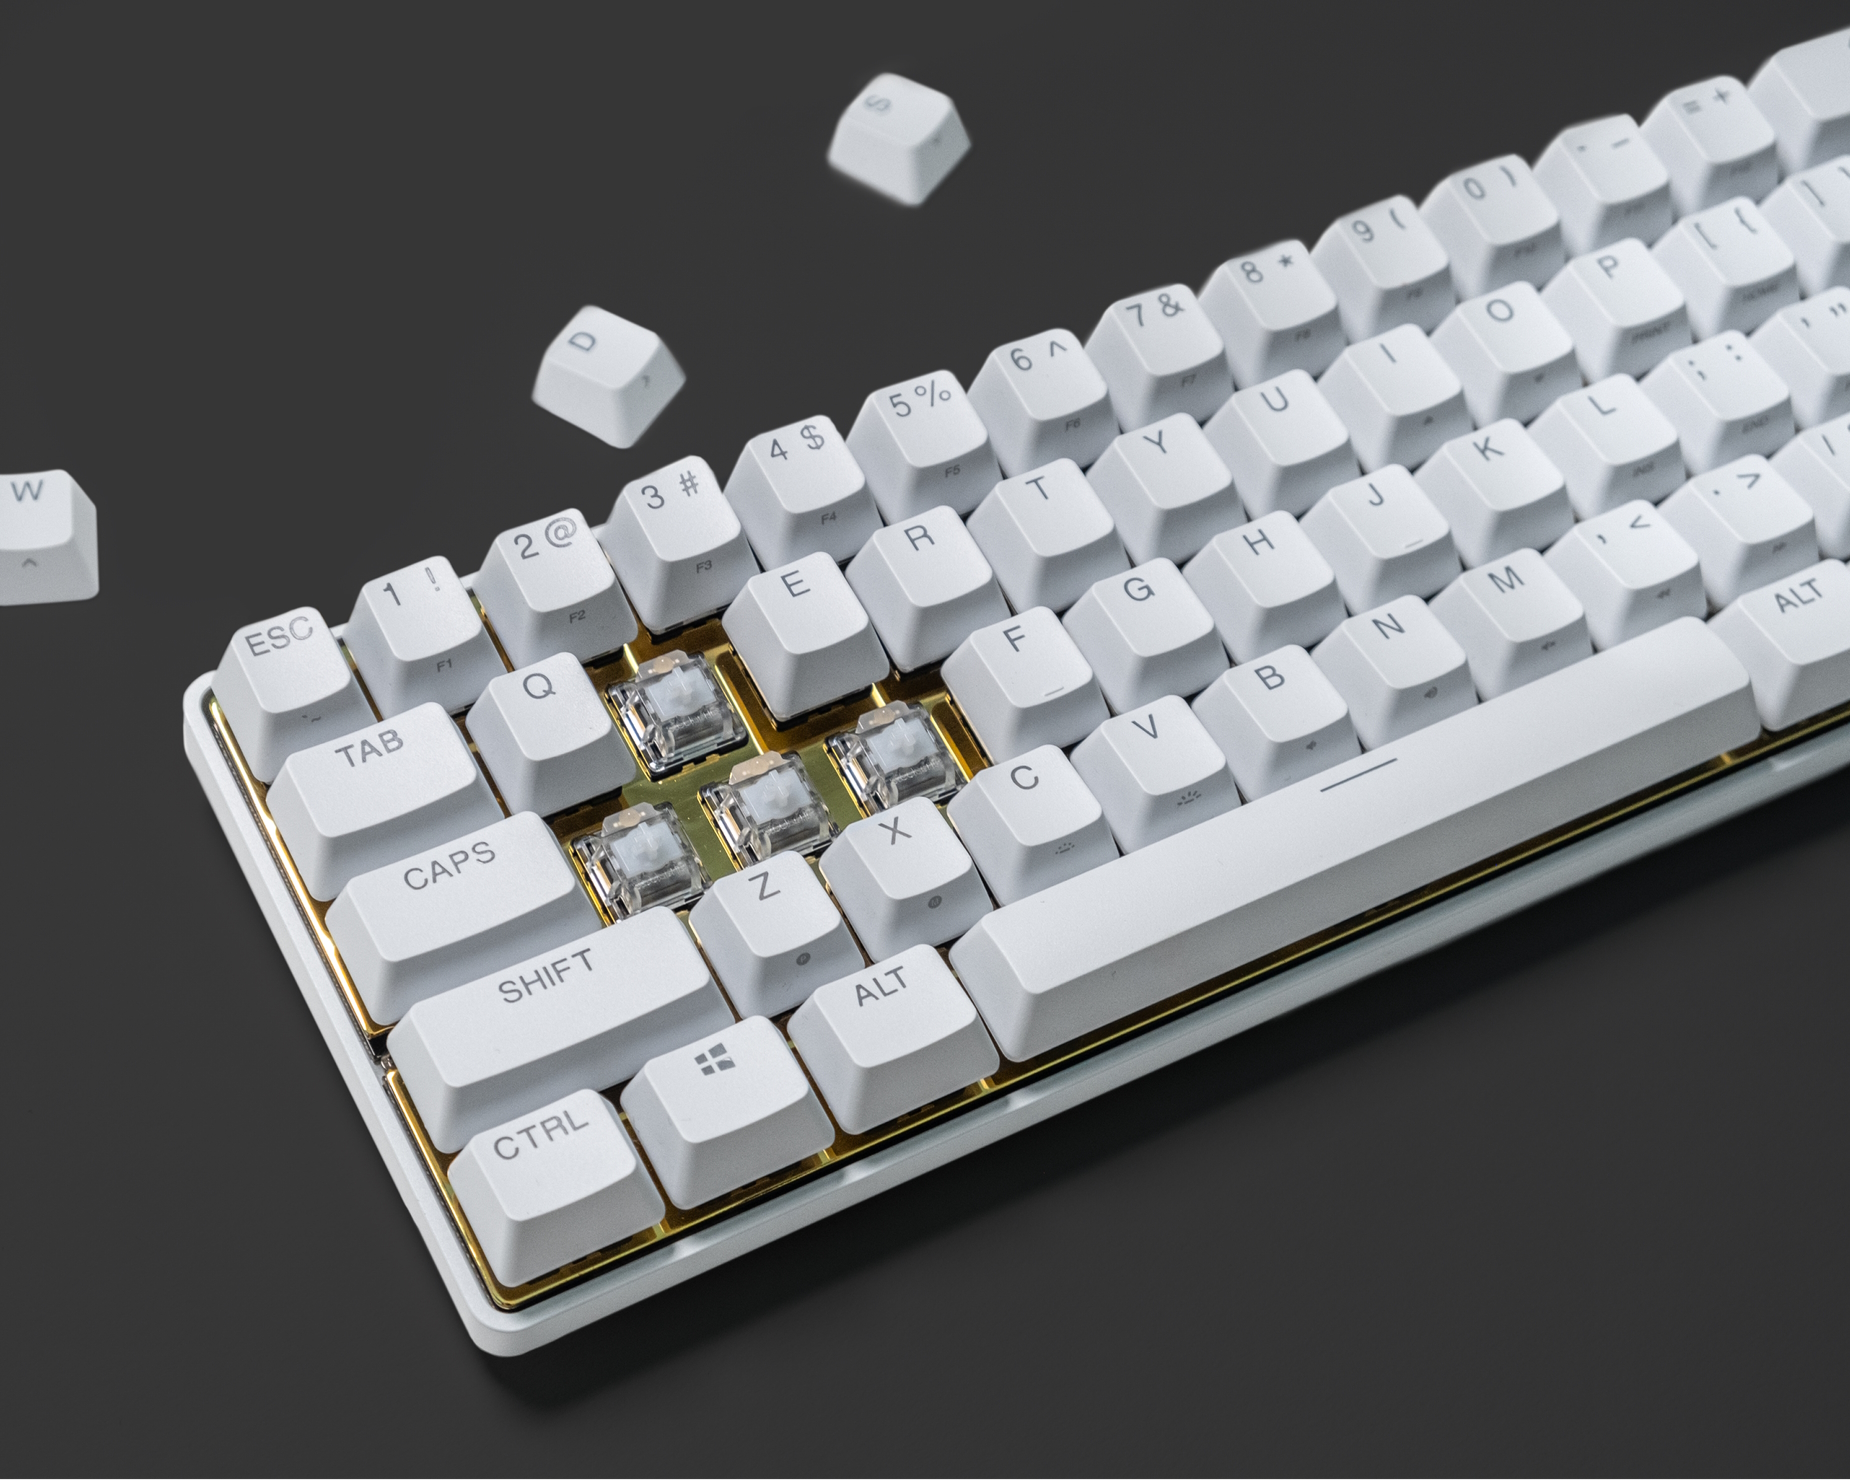 SteelSeries launches EXTREMELY rare Apex Pro Mini: Limited-Edition White x  Gold keyboard — buy it ASAP!